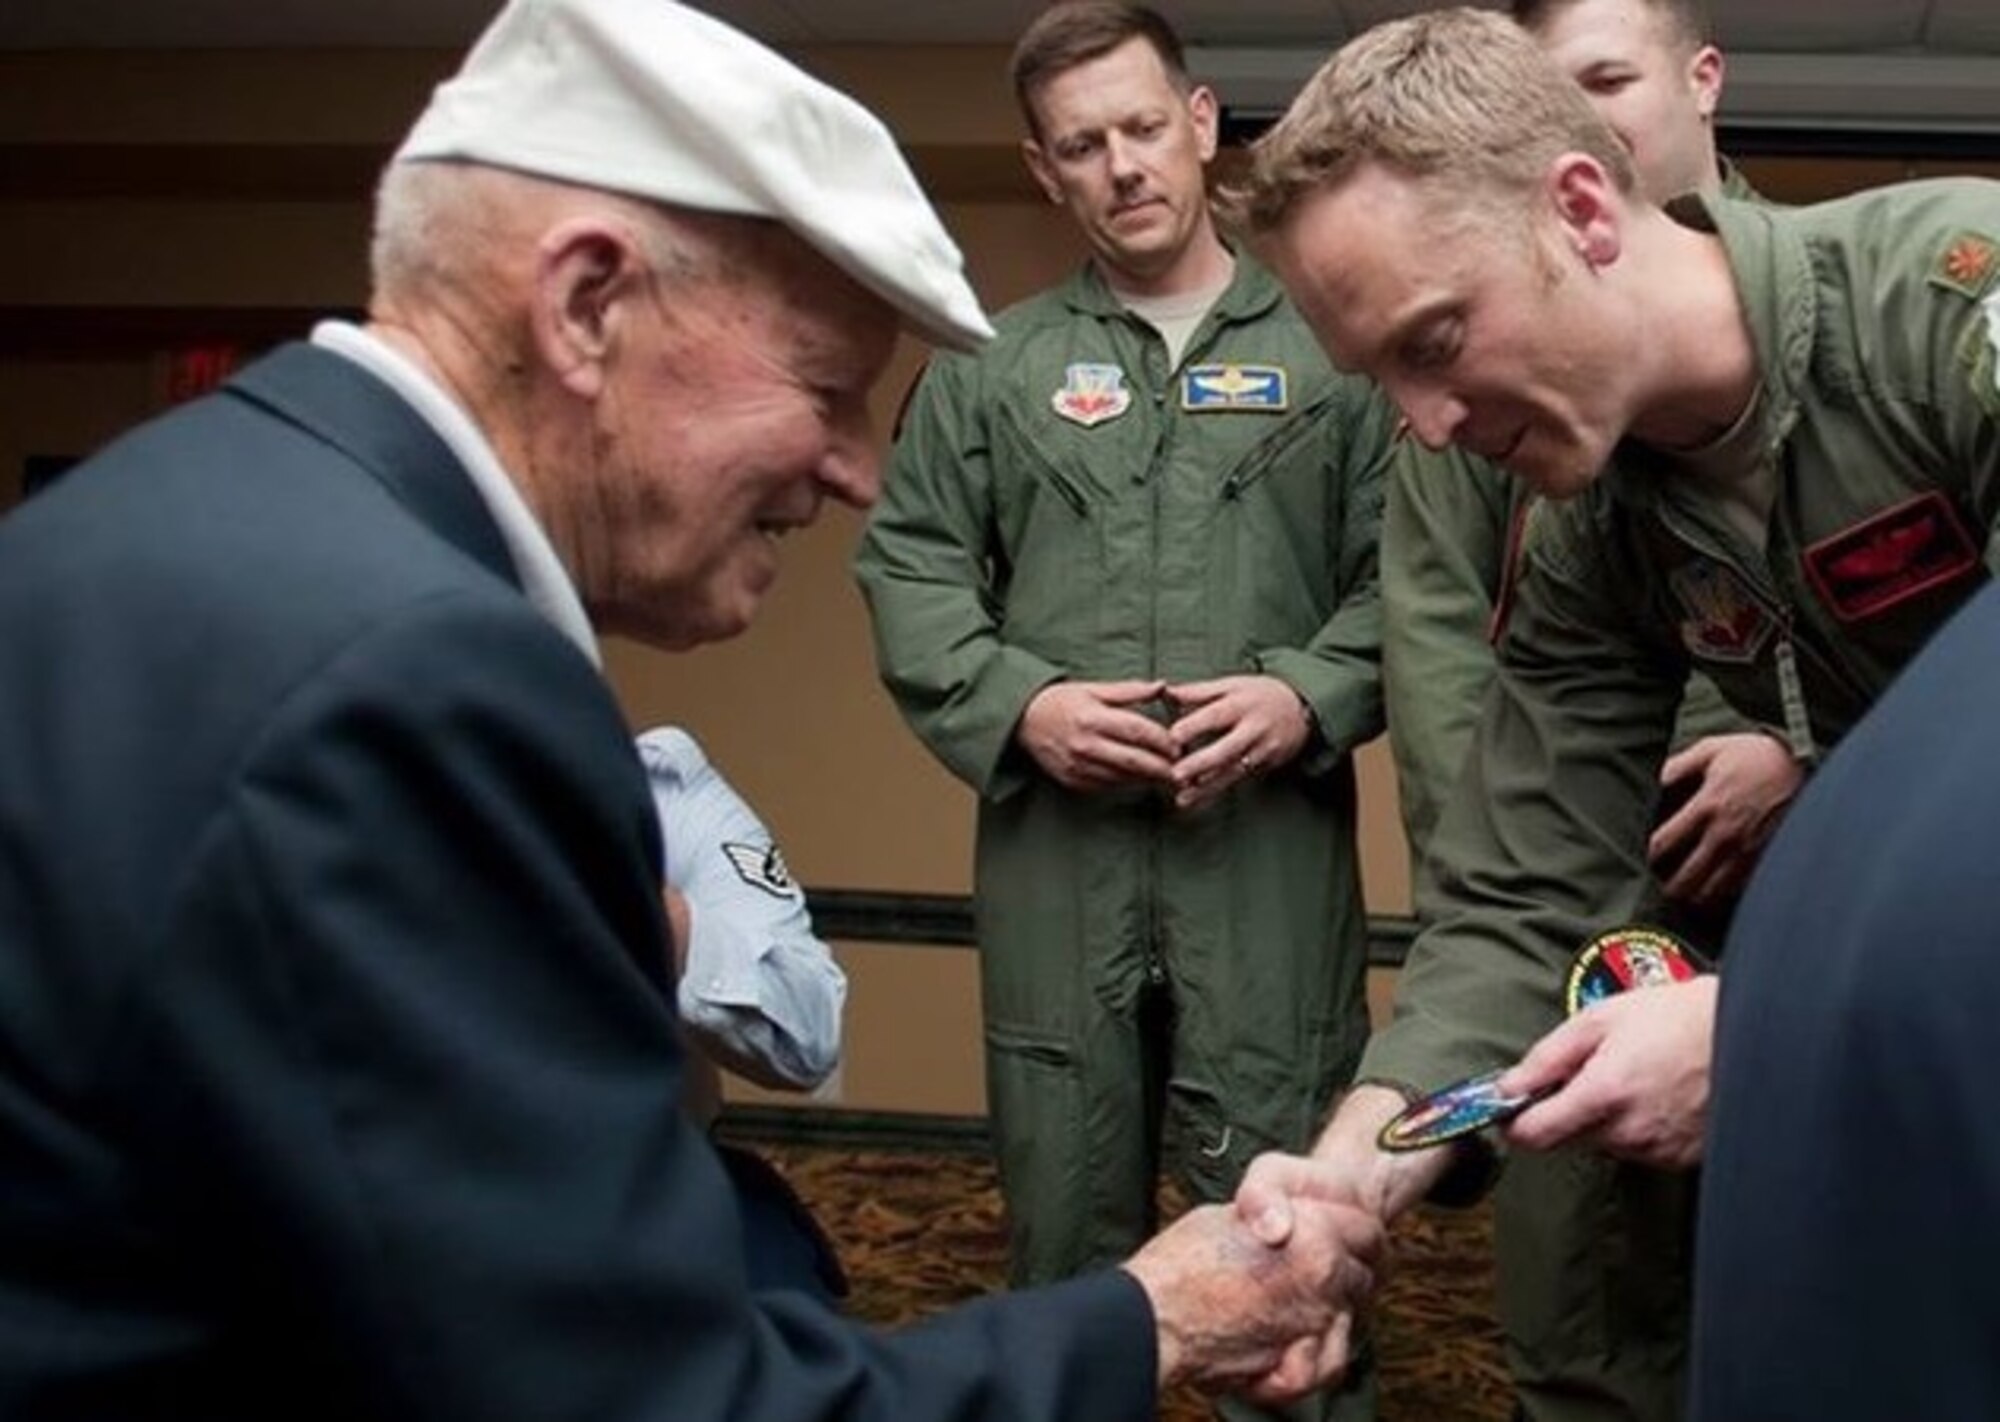 U.S. Army Air Corps Staff Sgt. David Thatcher, left, receives a recent B-1 bomber deployment patch during the Final Doolittle Raider Toast in November 2013. Following the Doolittle Raid, Thatcher served in England and Africa until January 1944, flying in a B-26 bomber in 26 missions over North Africa and Europe, including the first bombing raid over Rome. (Courtesy photo/Released)